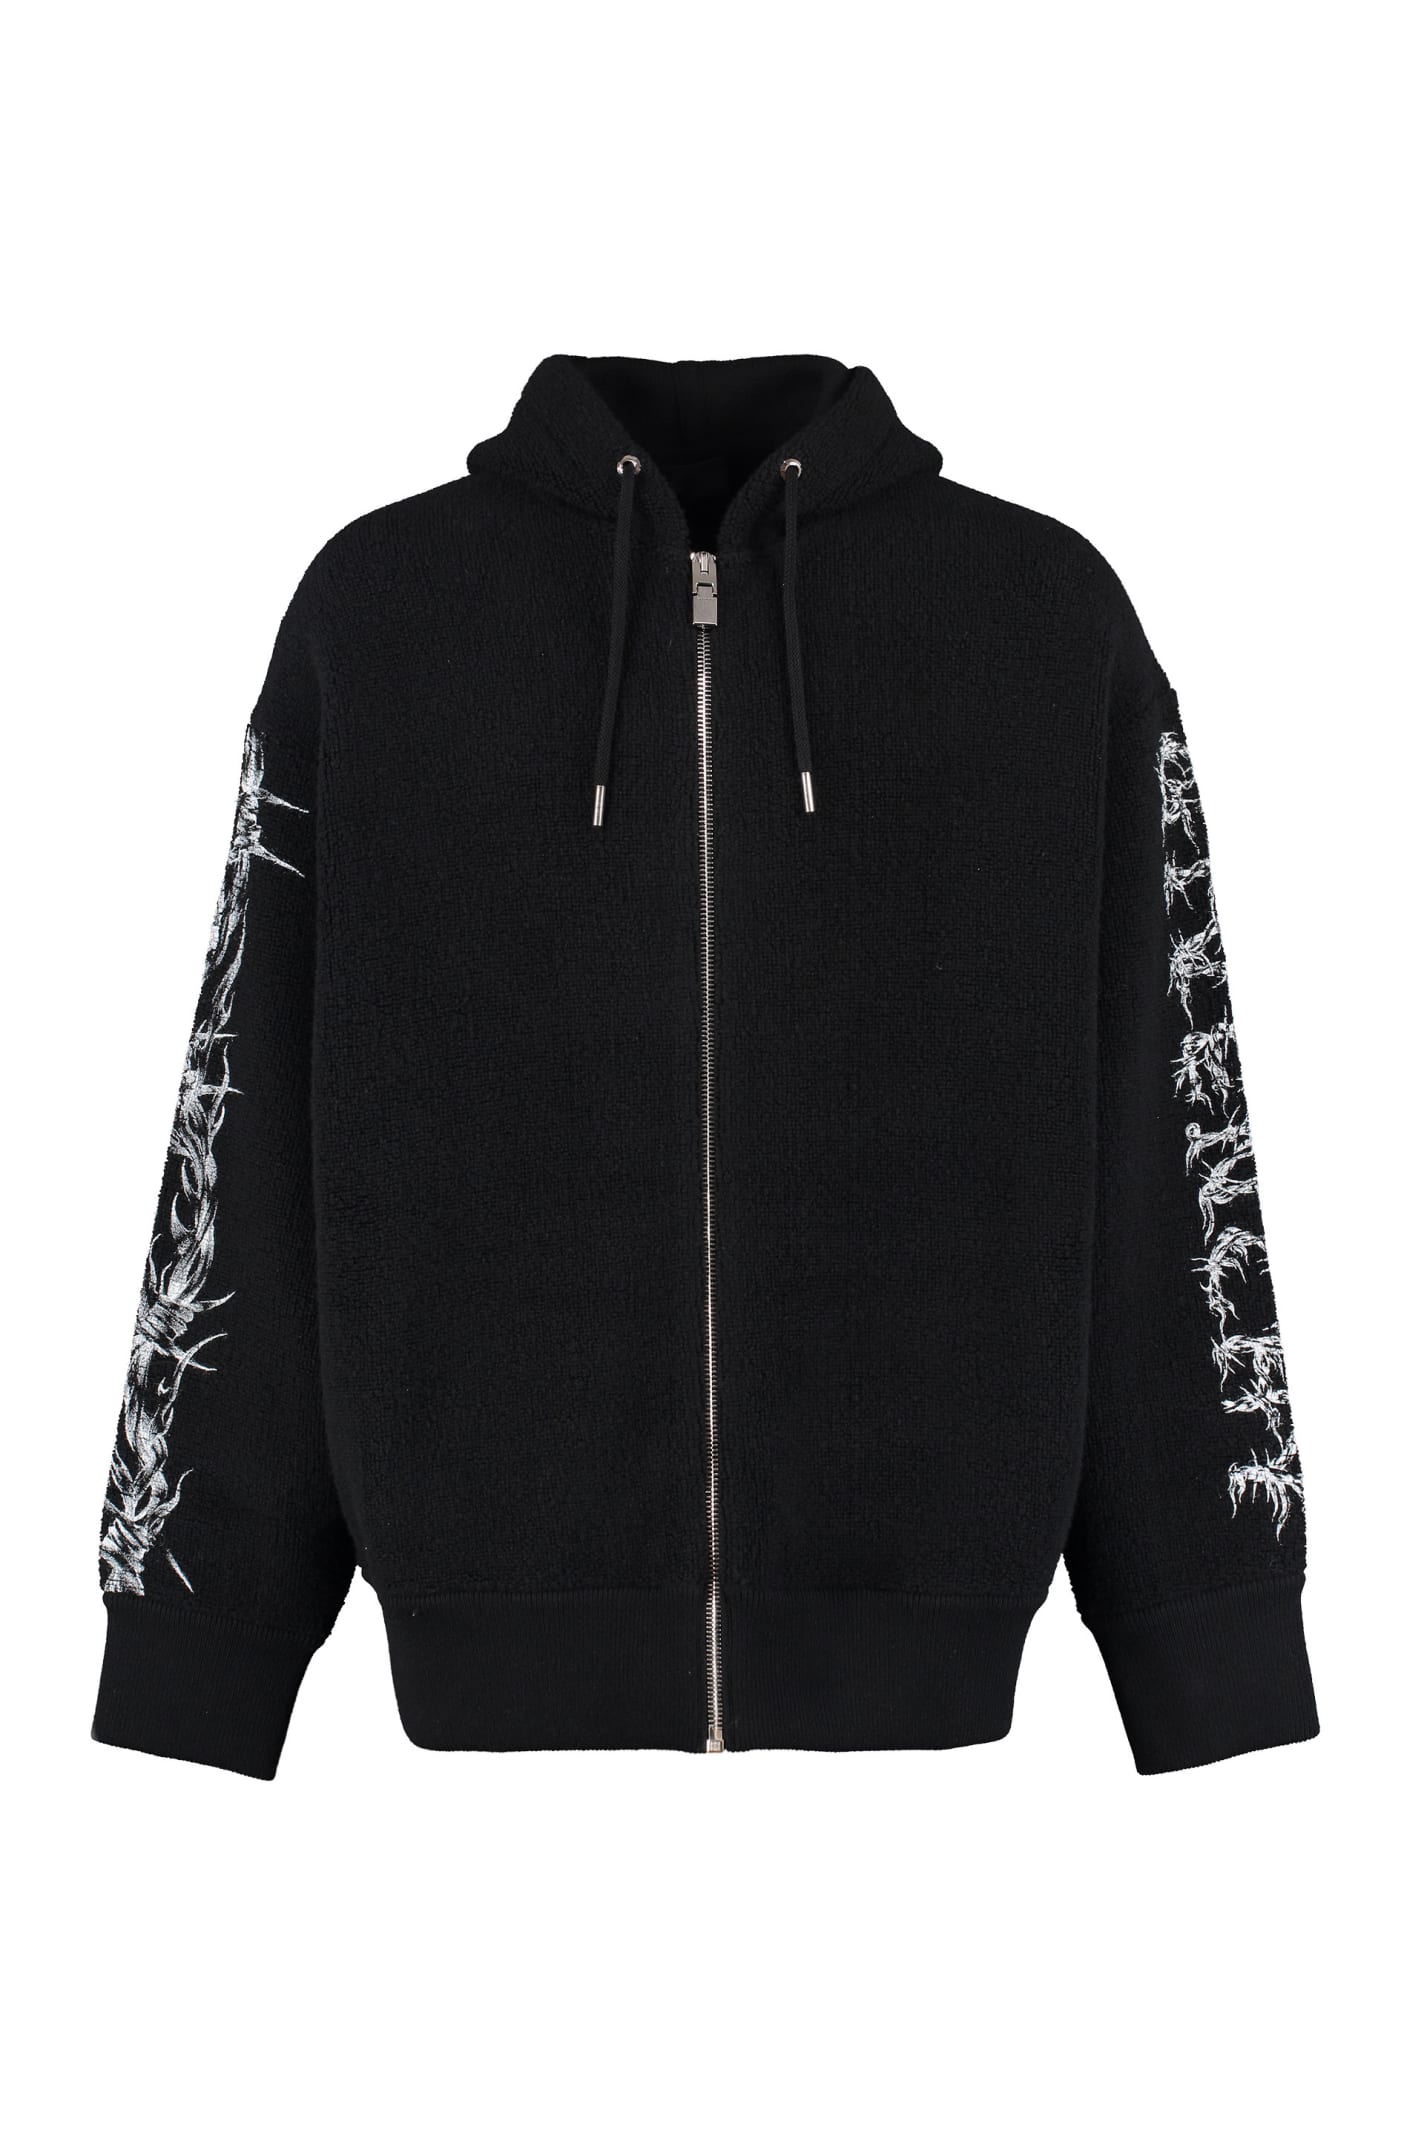 Givenchy Knitted Full Zip Hoodie